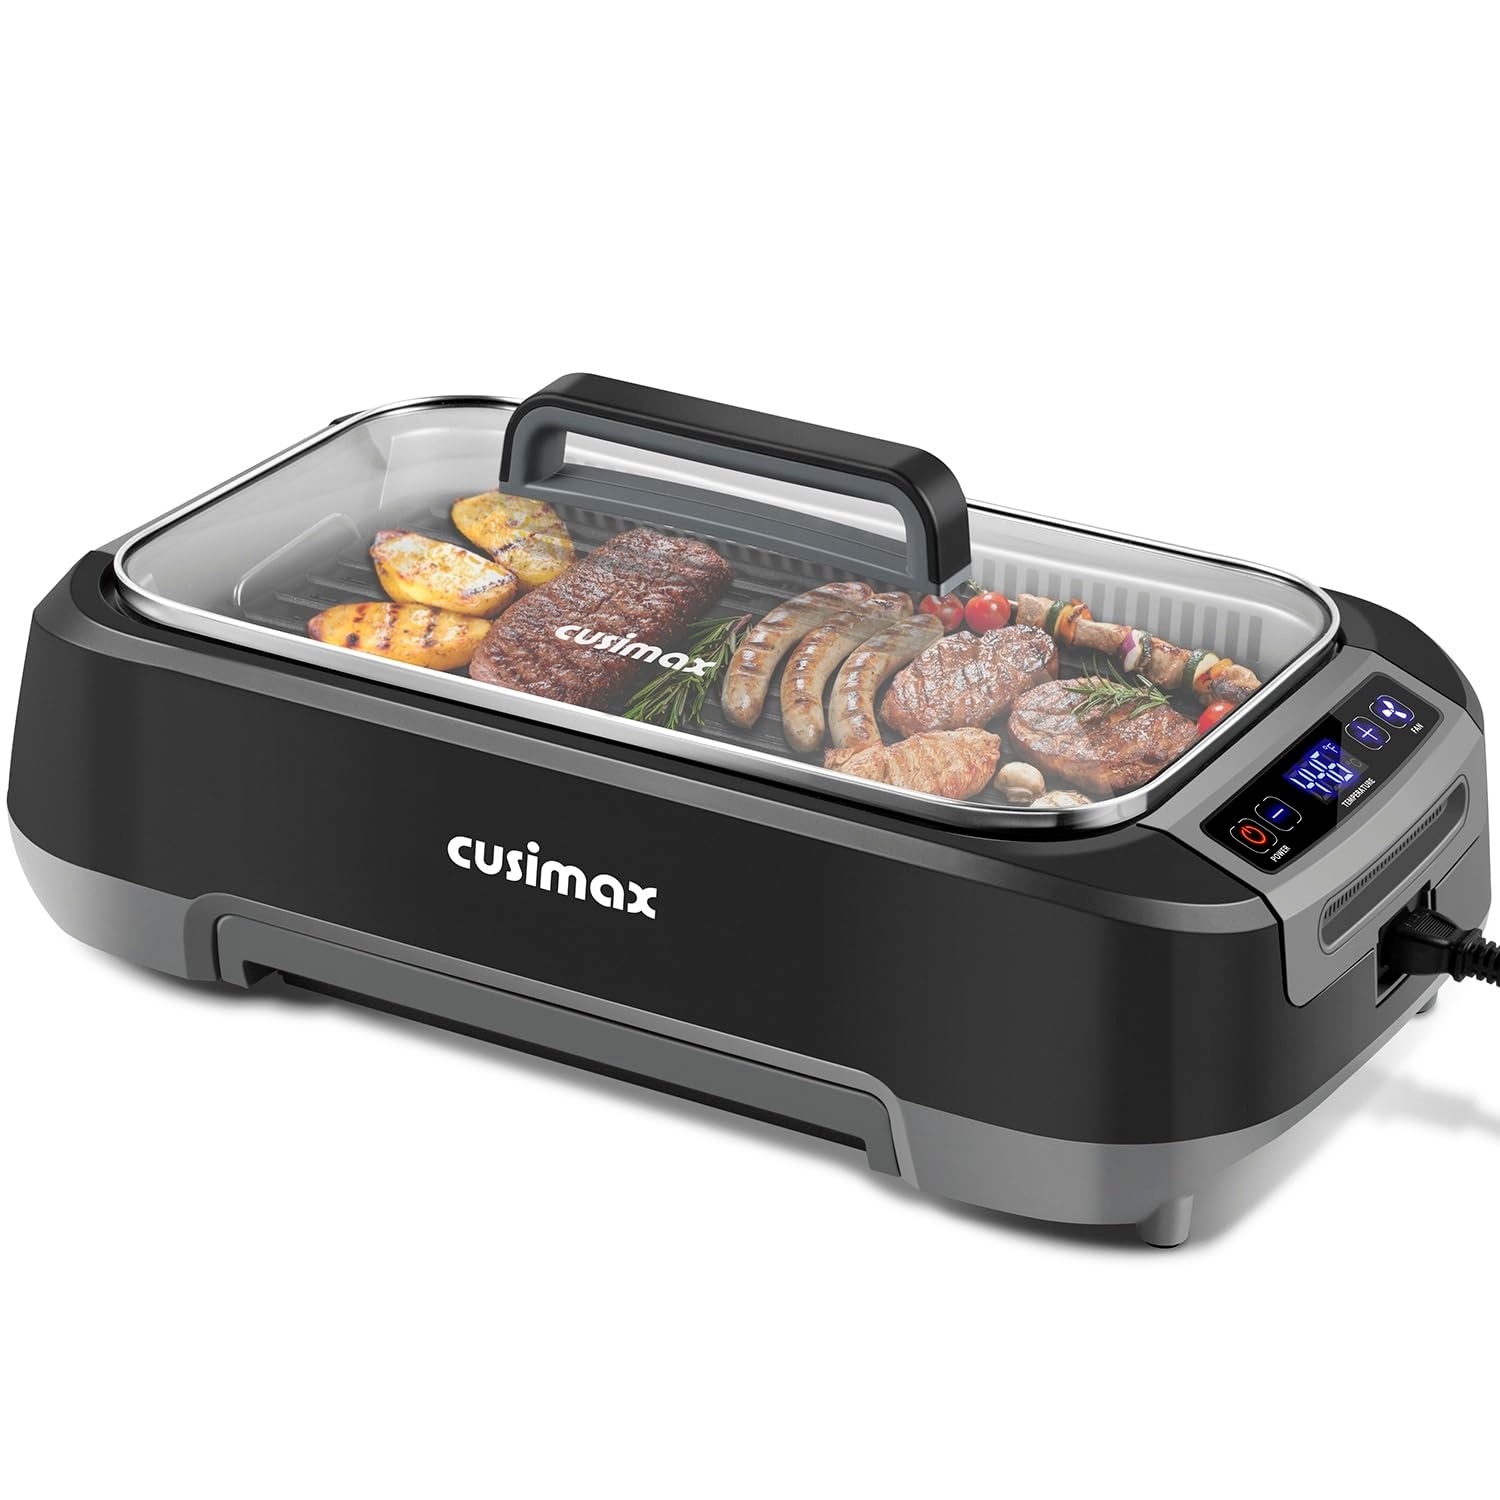 https://ak1.ostkcdn.com/images/products/is/images/direct/b5e49bae89220a98129144e75a04ad80064327dd/Indoor-Grill%2C-1500W-Electric-Grill-Korean-BBQ-Grill-with-LED-Smart-Display-%26-Tempered-Glass-Lid%2C-Non-stick-Removable-Grill-Plate.jpg